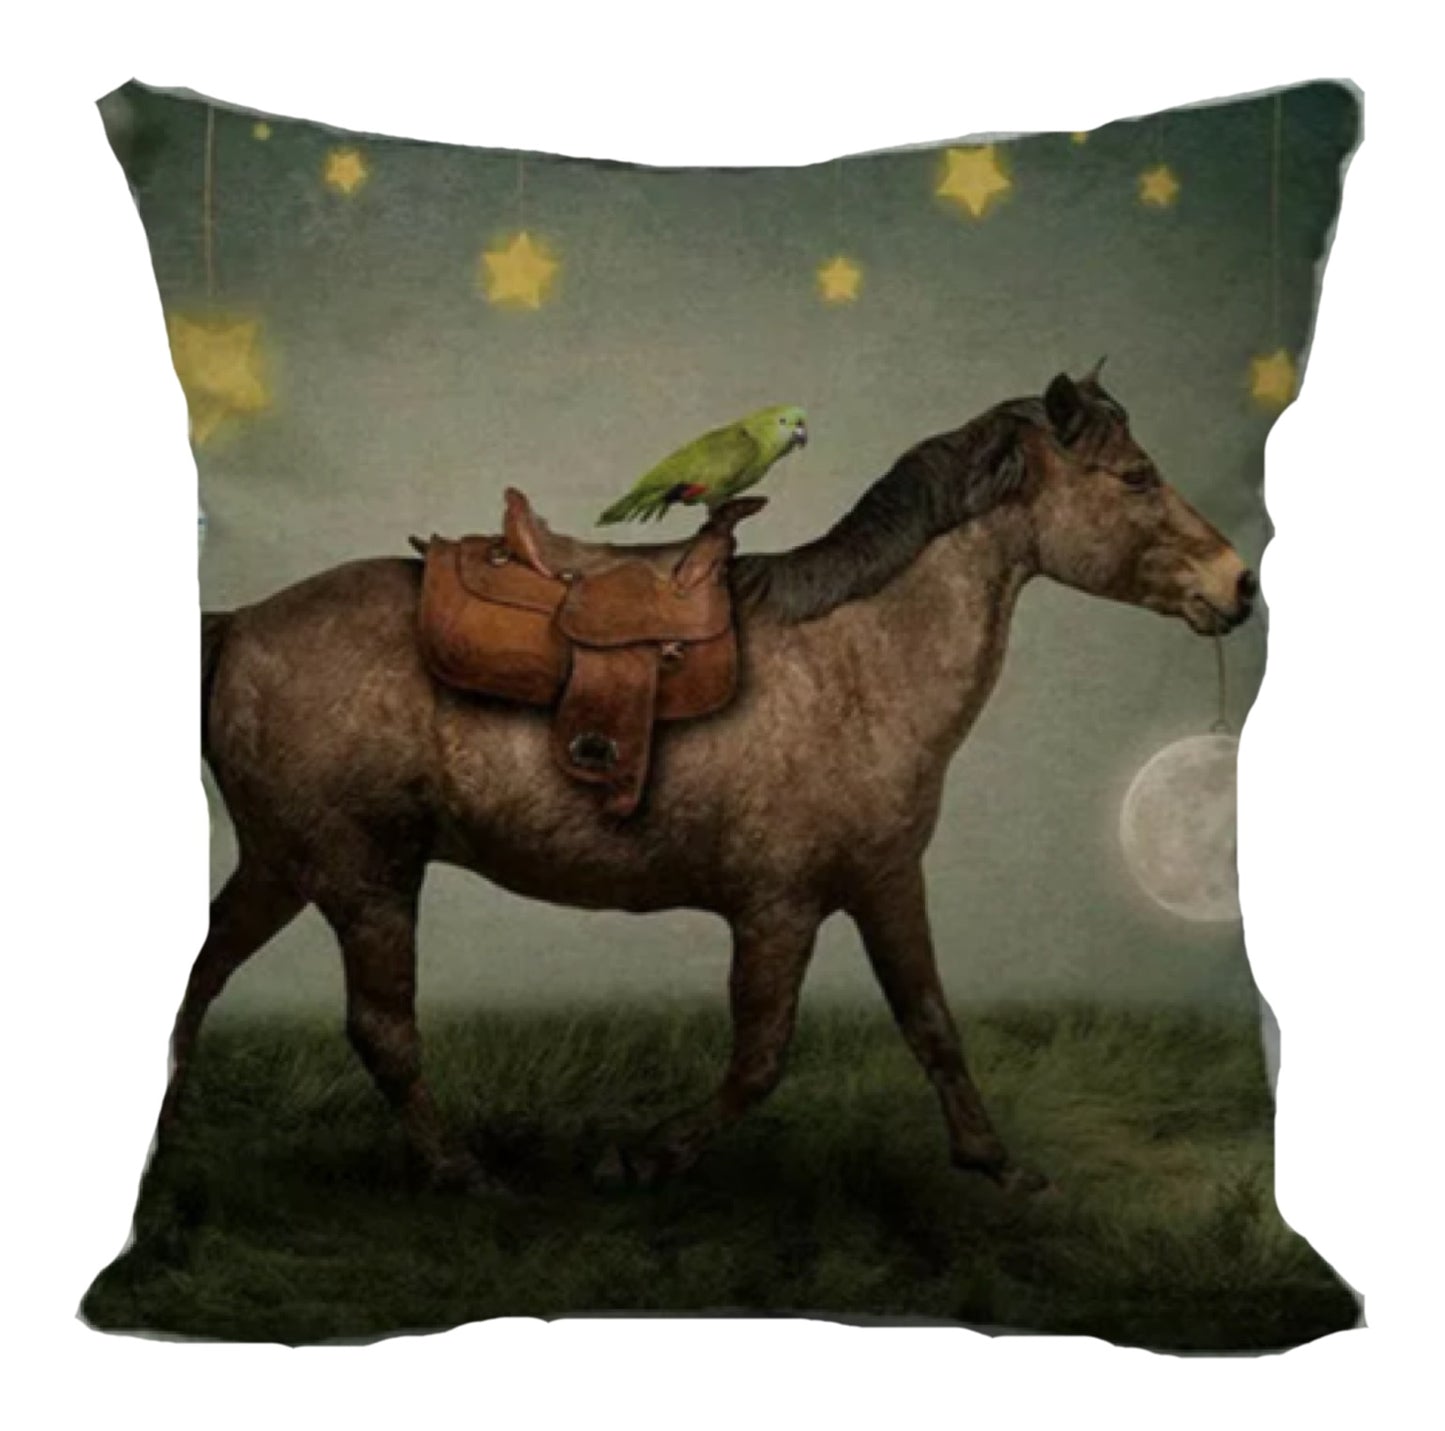 Cushion Cover Horse with Parrot Vintage Retro - The Renmy Store Homewares & Gifts 